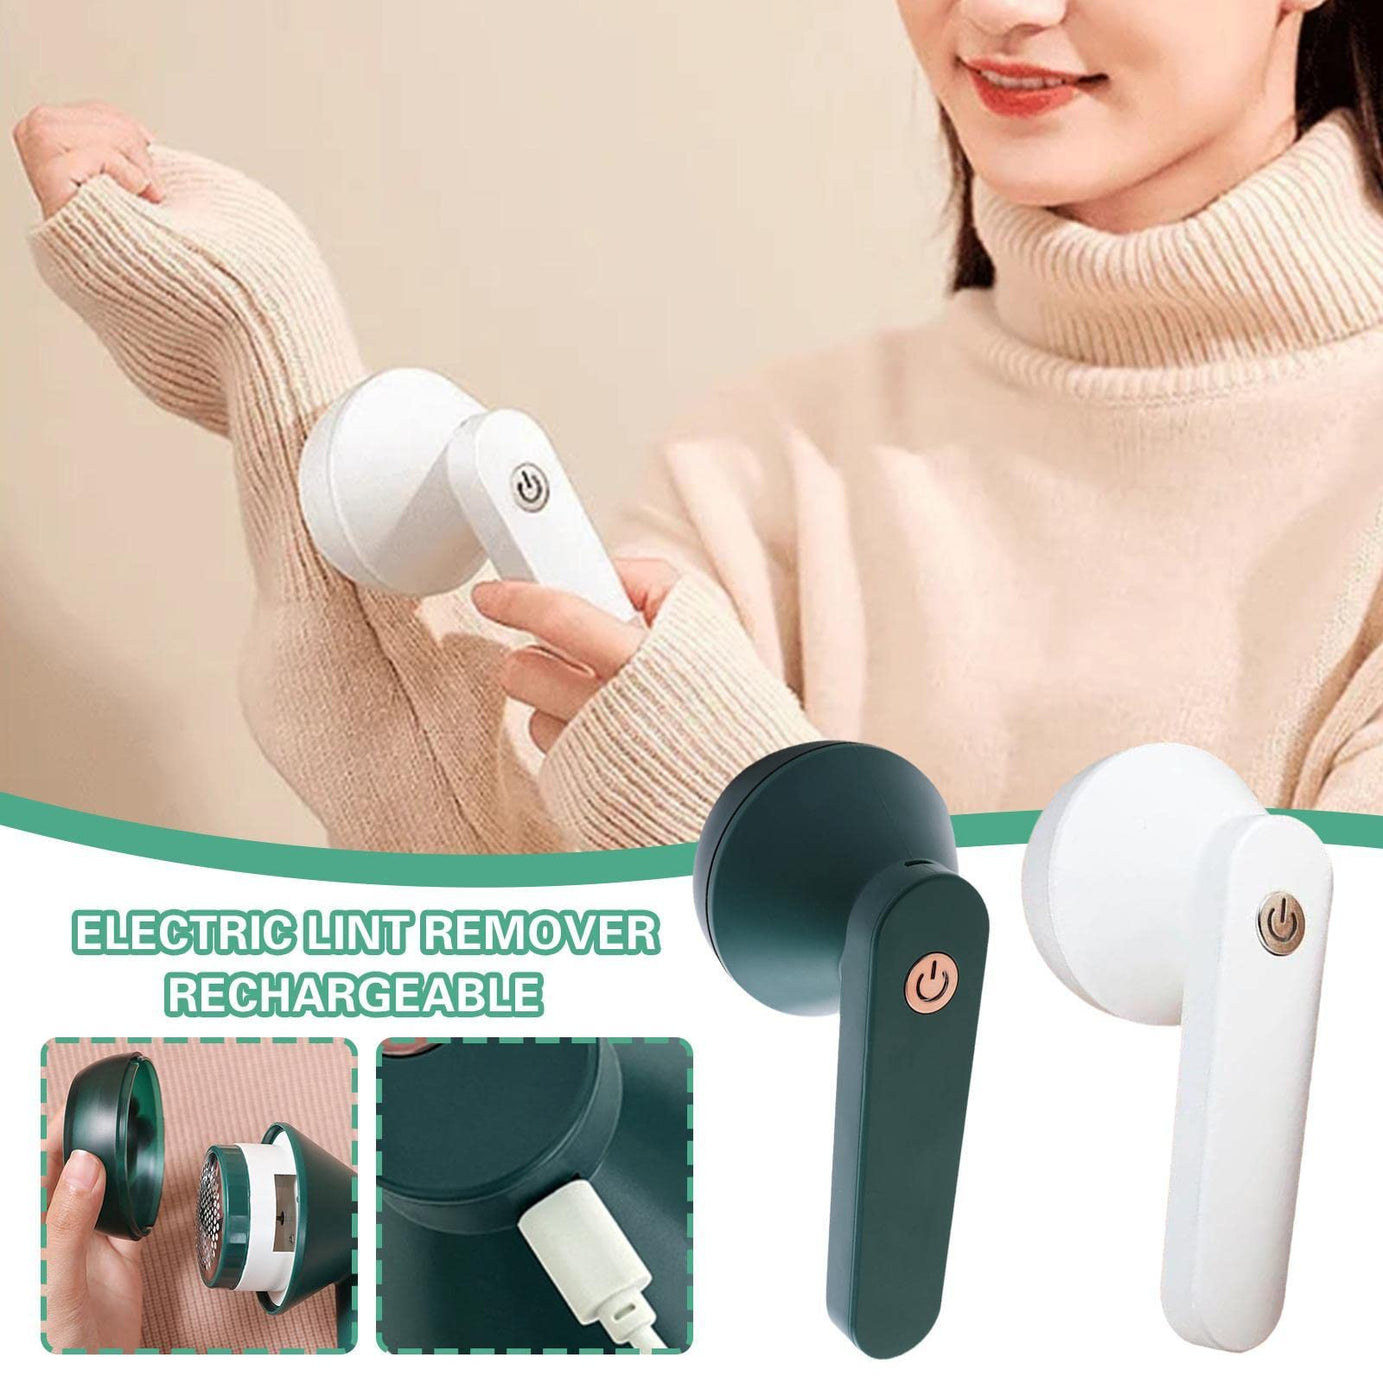 Rechargeable Fabric Shaver: Your Portable Solution for Clothing Lint and Fluff Removal